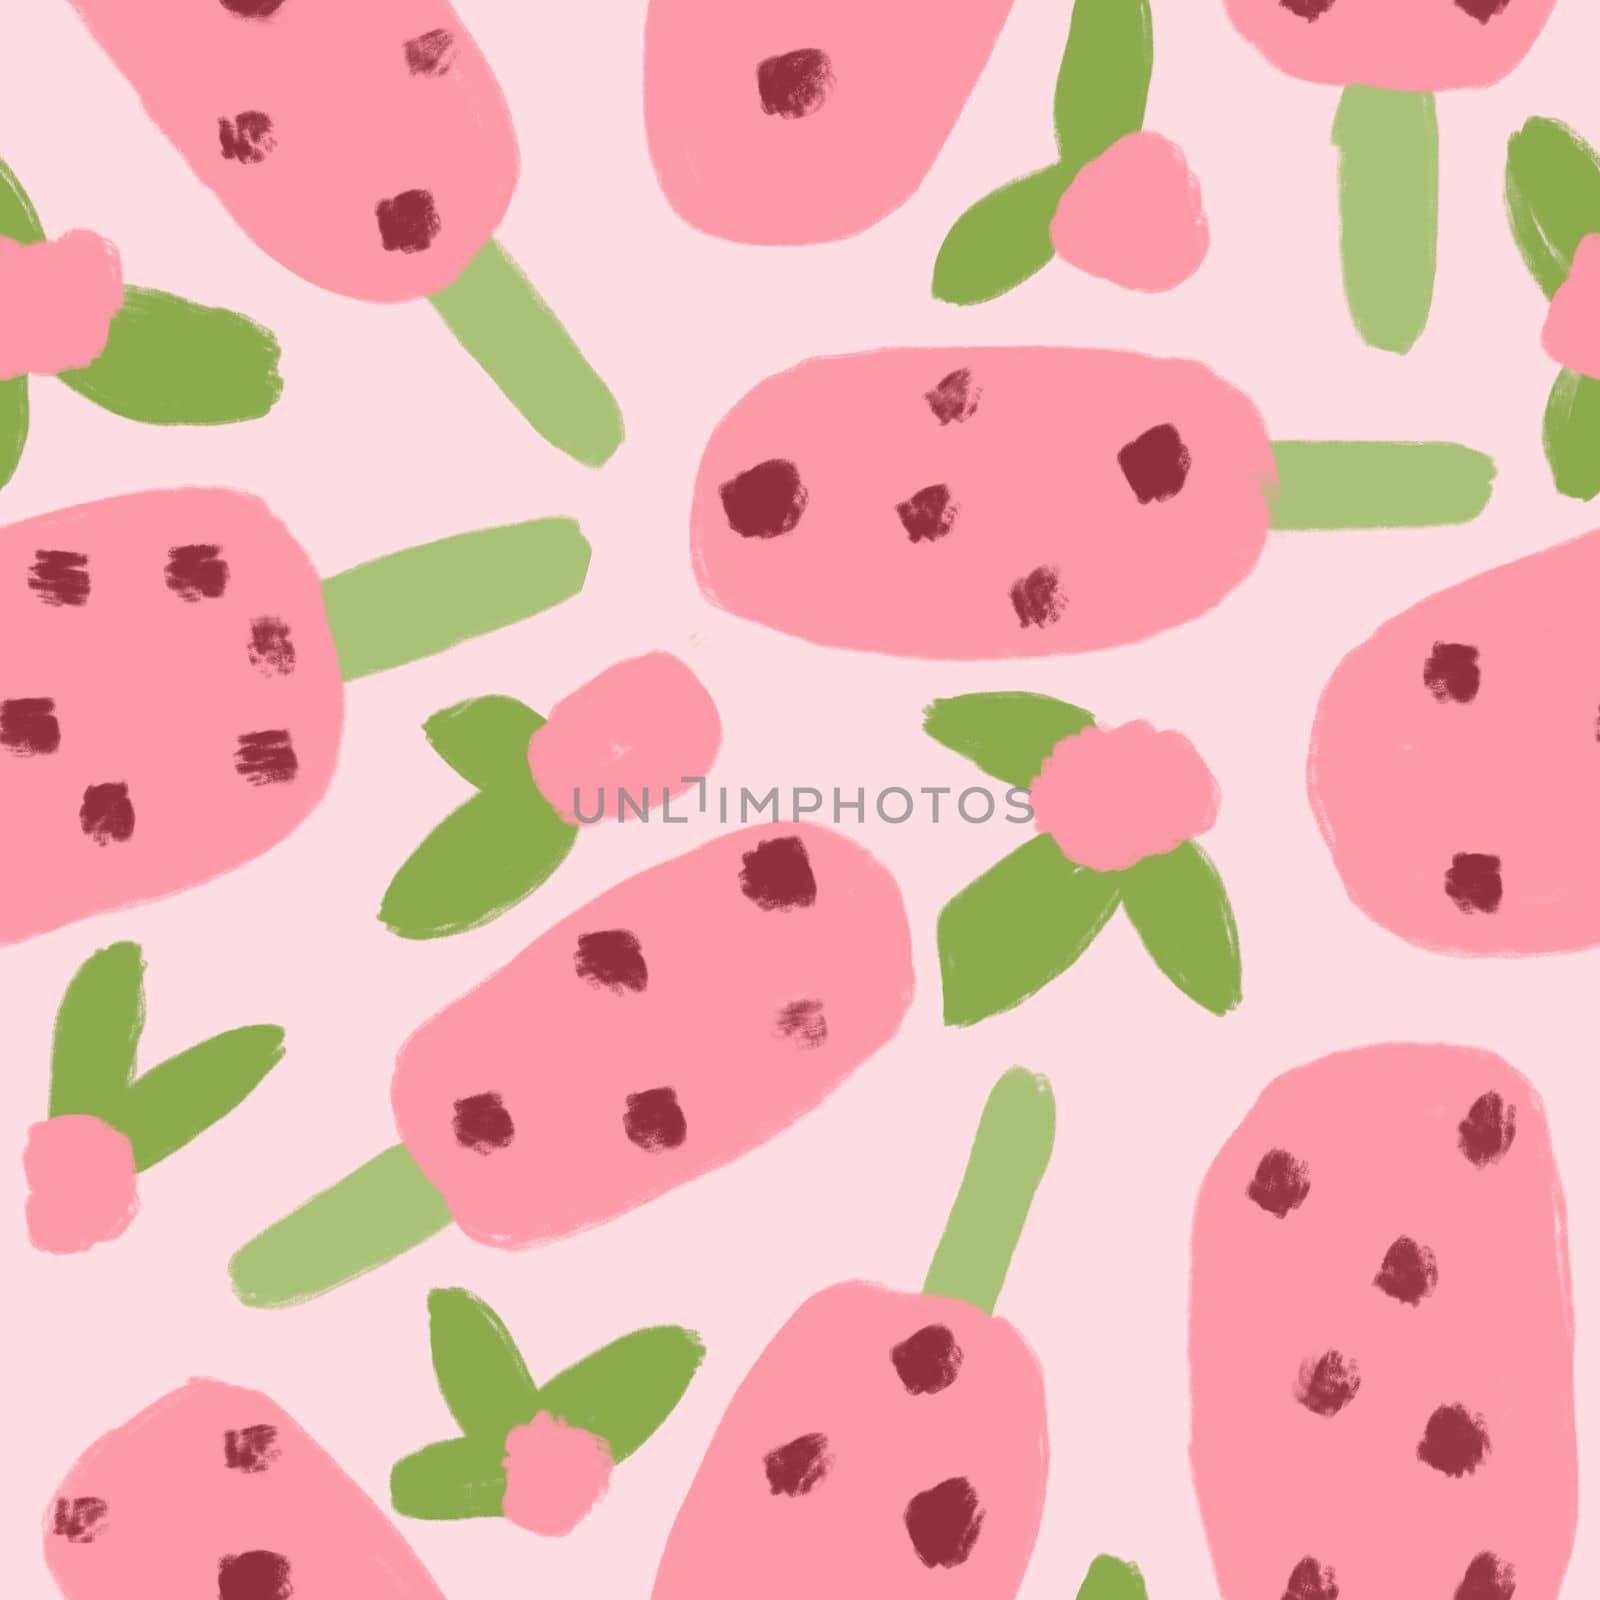 Hand drawn seamless pattern with ice cream popsicle sweet food. Pink rose flowers floral art, summer colorful print with frozen tasty dessert, doodle funny style